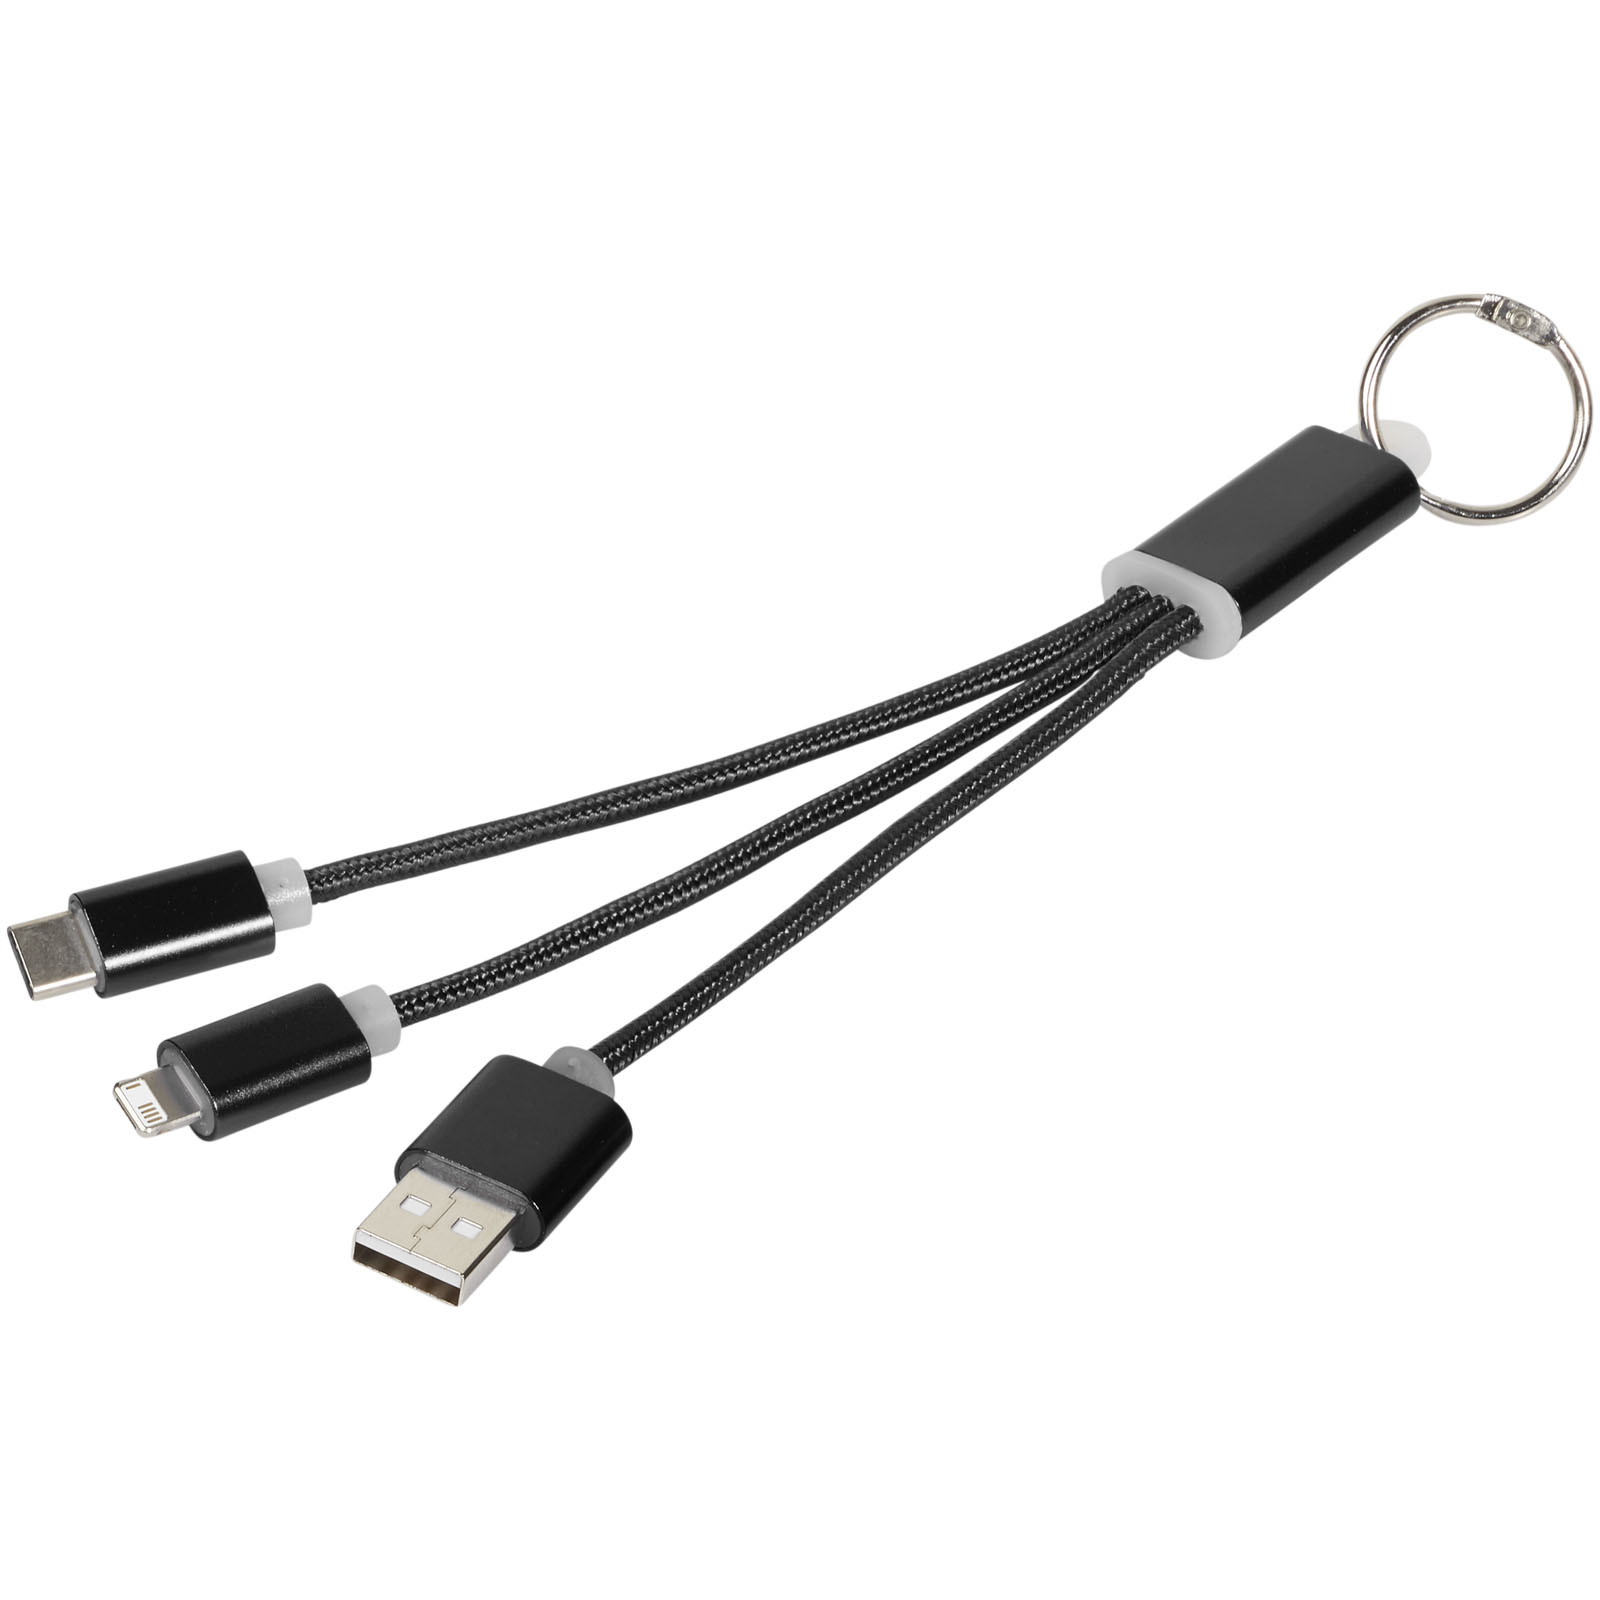 Advertising Cables - Metal 3-in-1 charging cable with keychain - 0